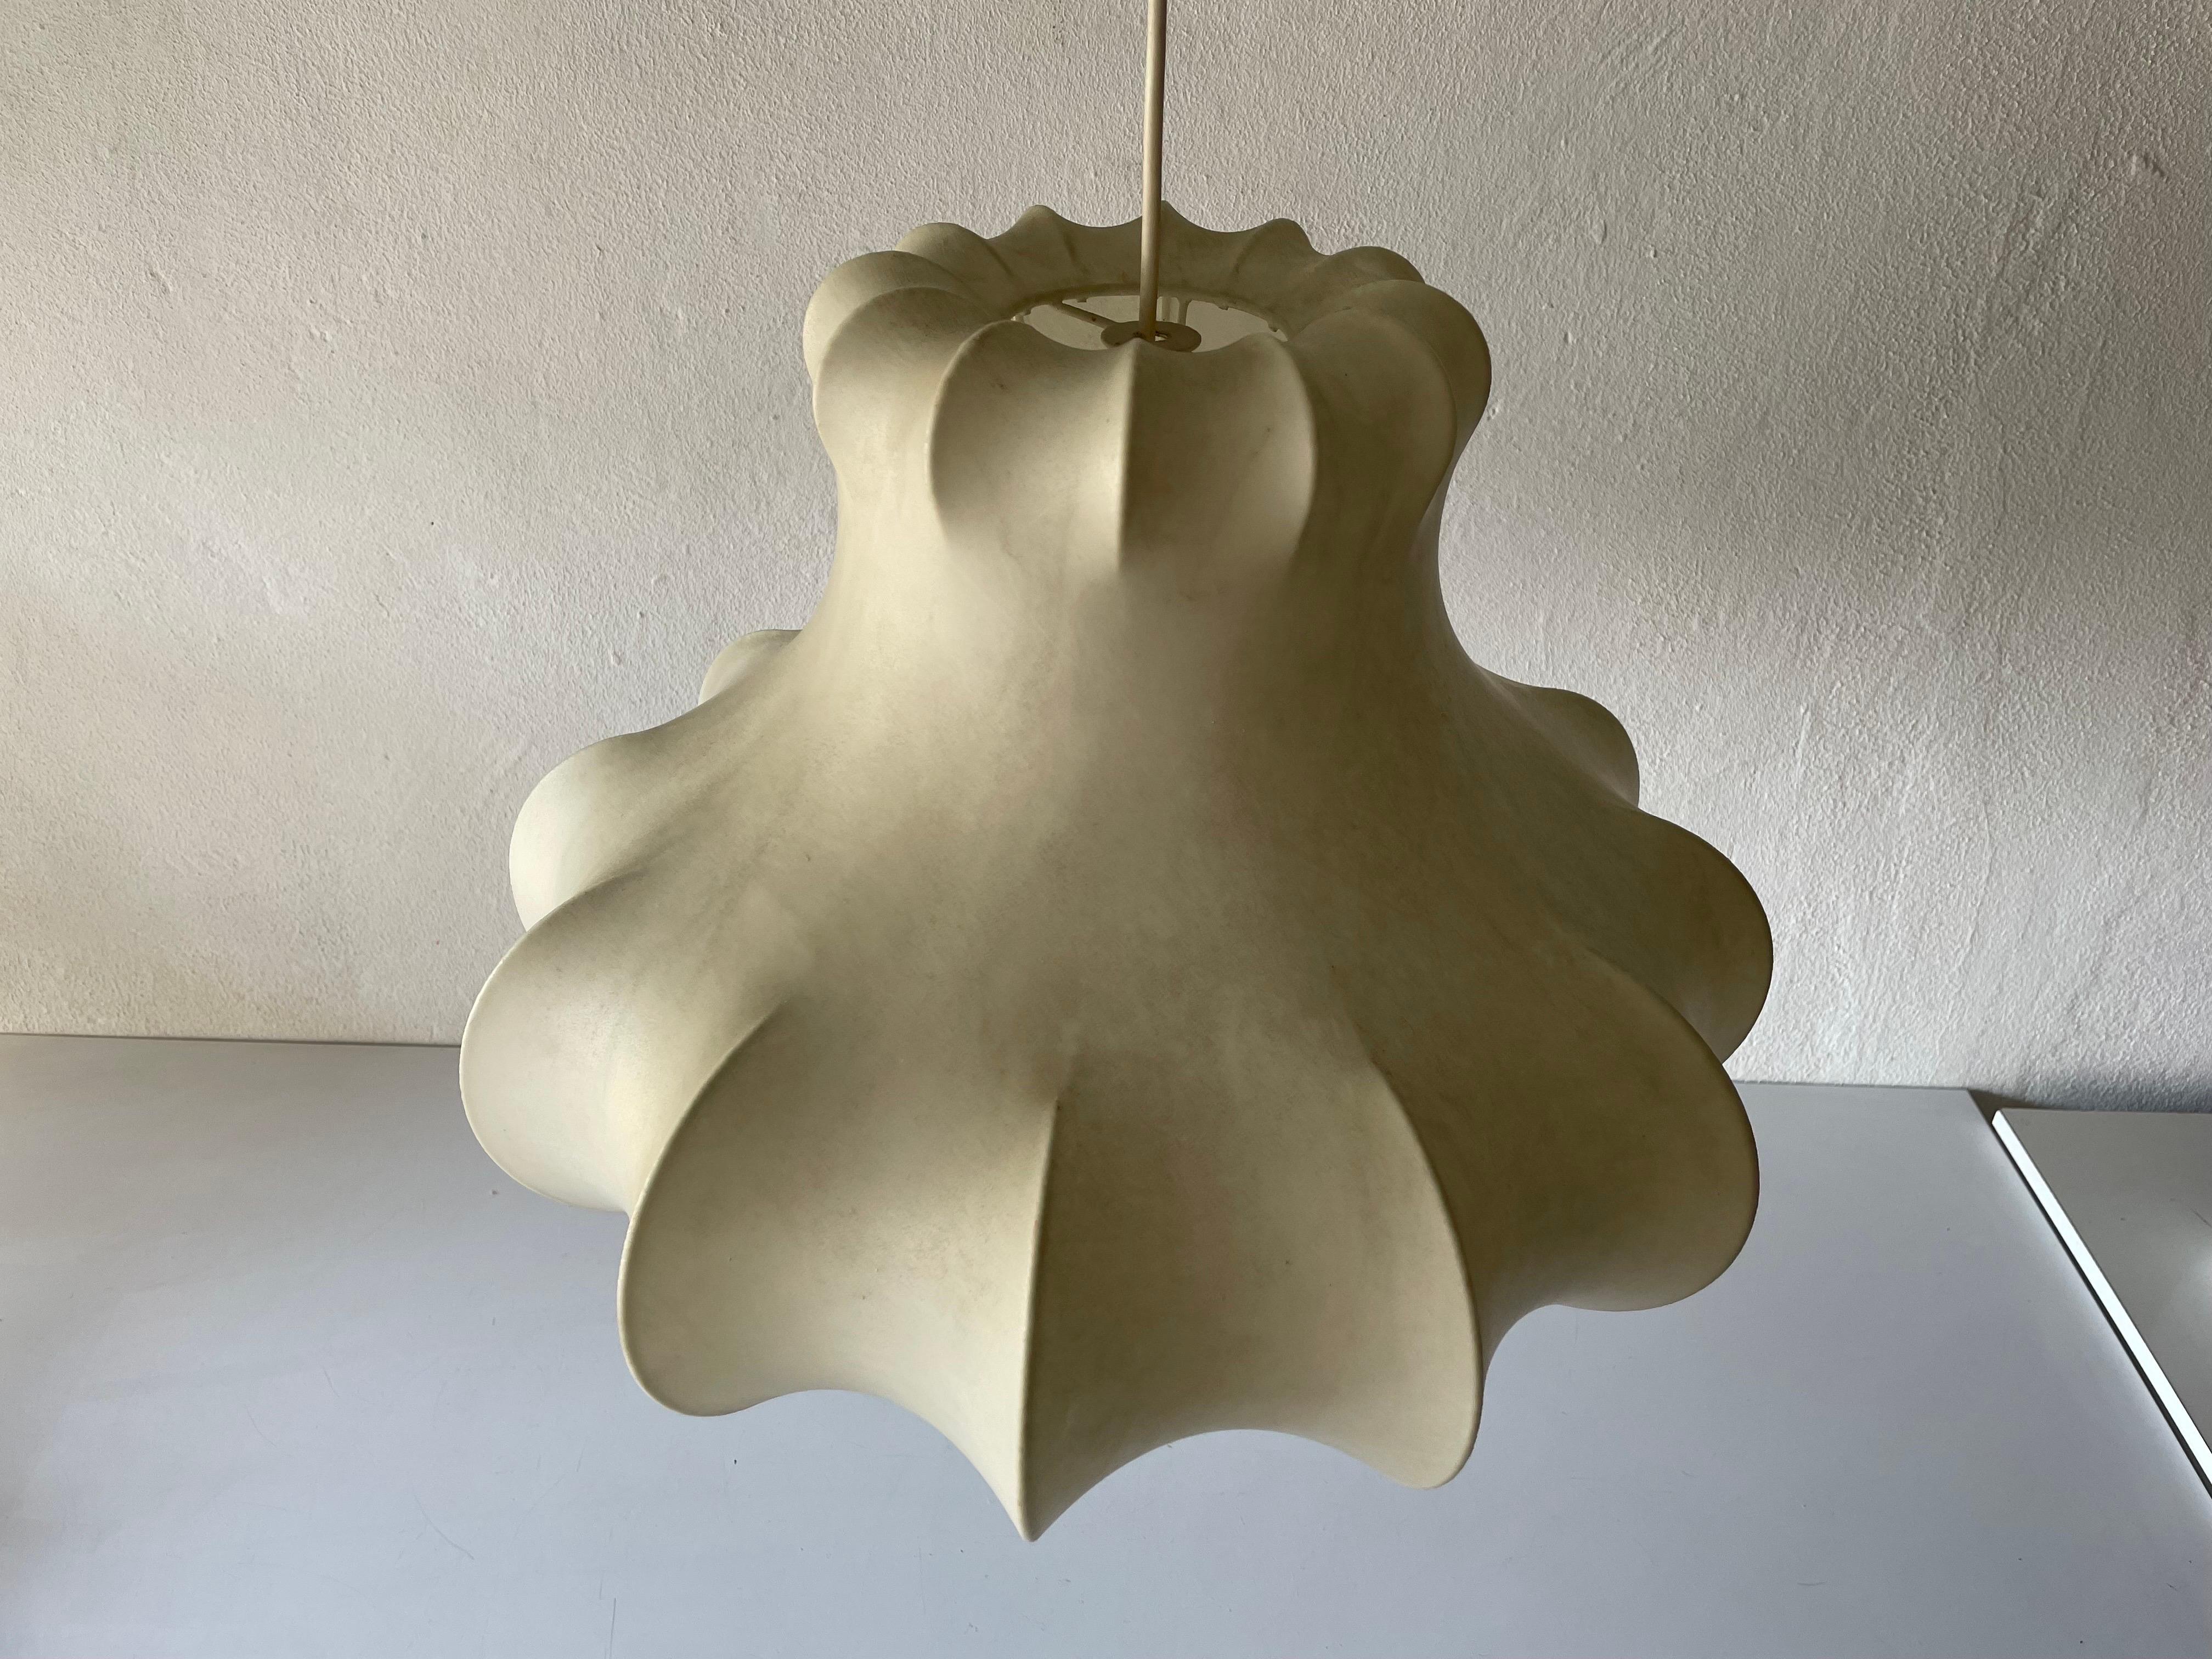 Cocoon pendant lamp by Goldkant, 1960s, Germany
 
Lampshade is in very good vintage condition.

This lamp works with E27 light bulb. Max 100W
Wired and suitable to use with 220V and 110V for all countries.

Measurements:
Height: 90 cm
Shade